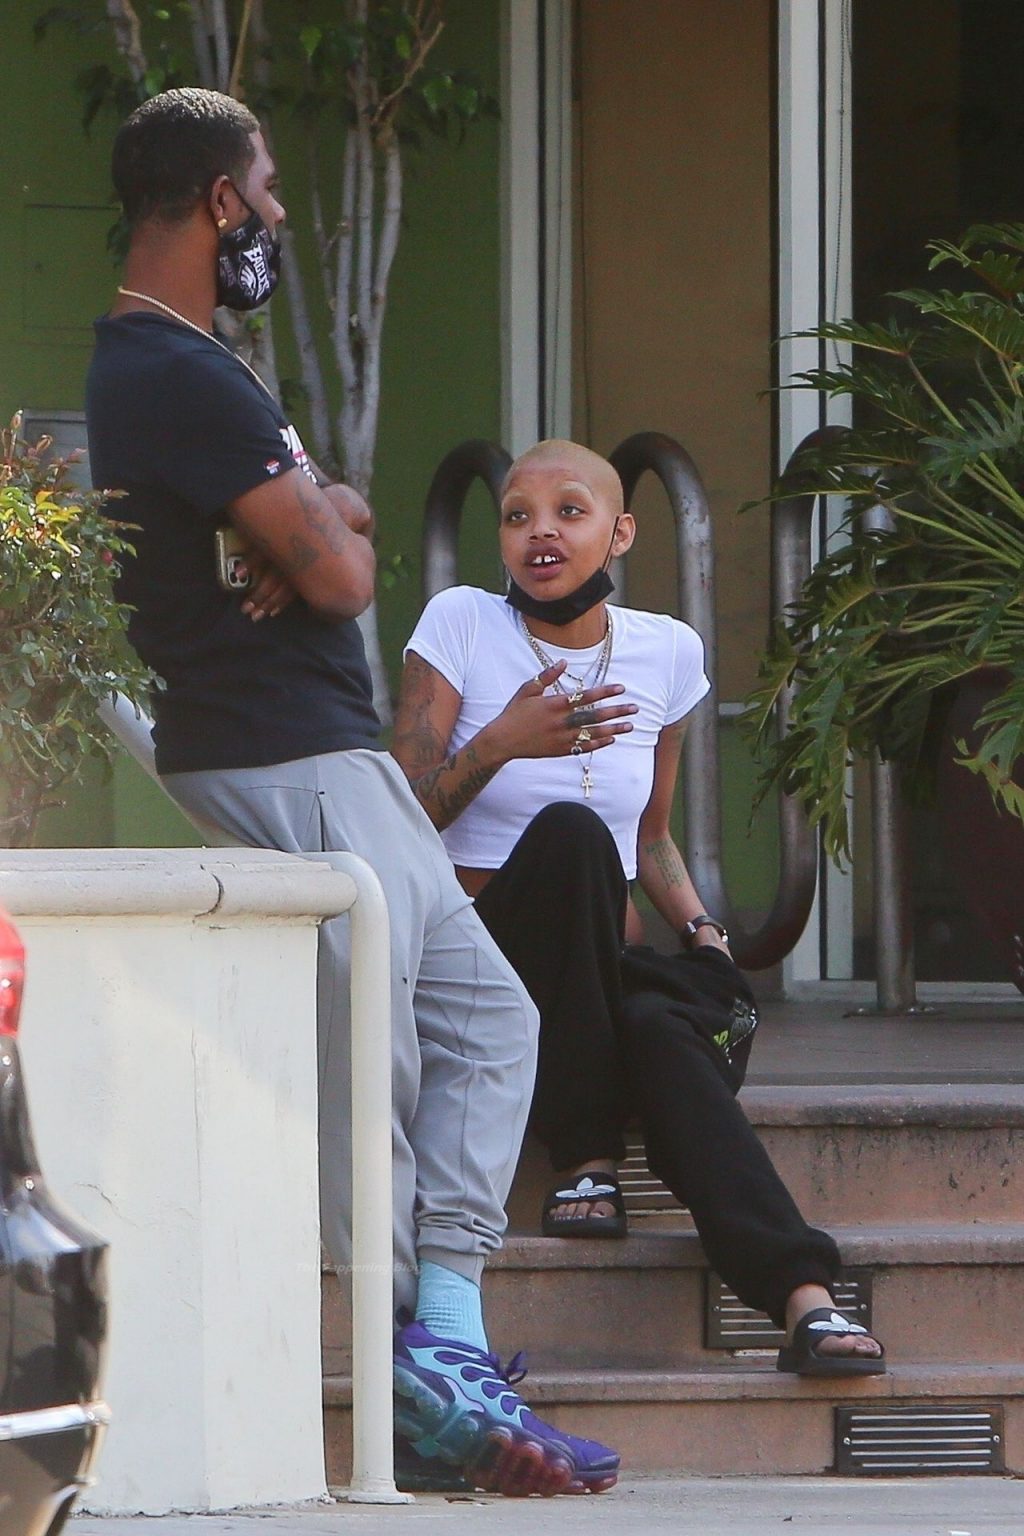 Braless Slick Woods is Pictured Socializing with Friends (22 Photos)